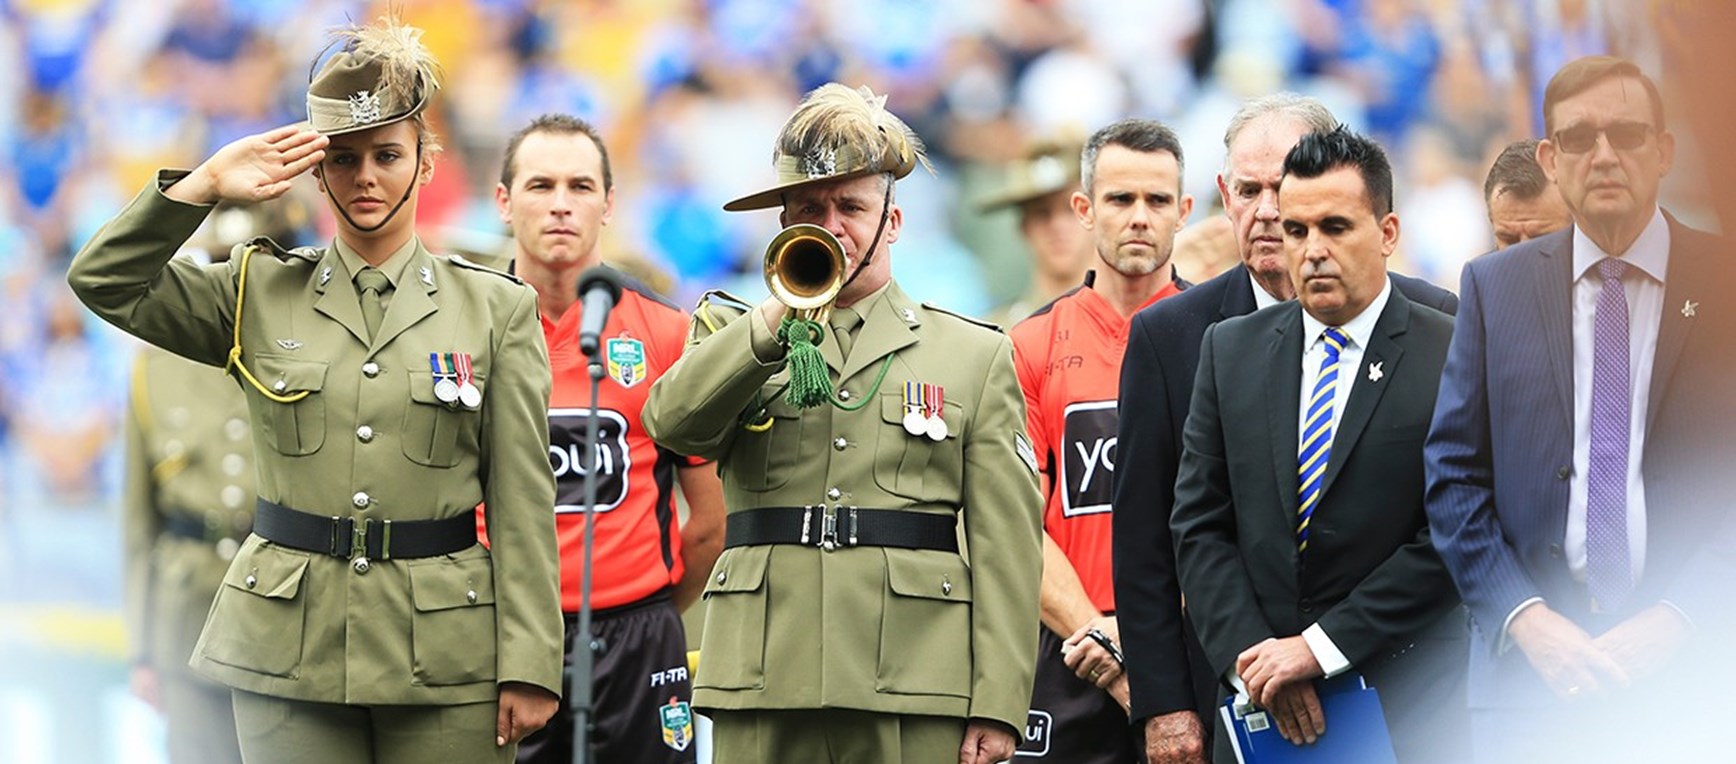 AROUND THE GROUNDS | Eels v Penrith Panthers, Salute to Service